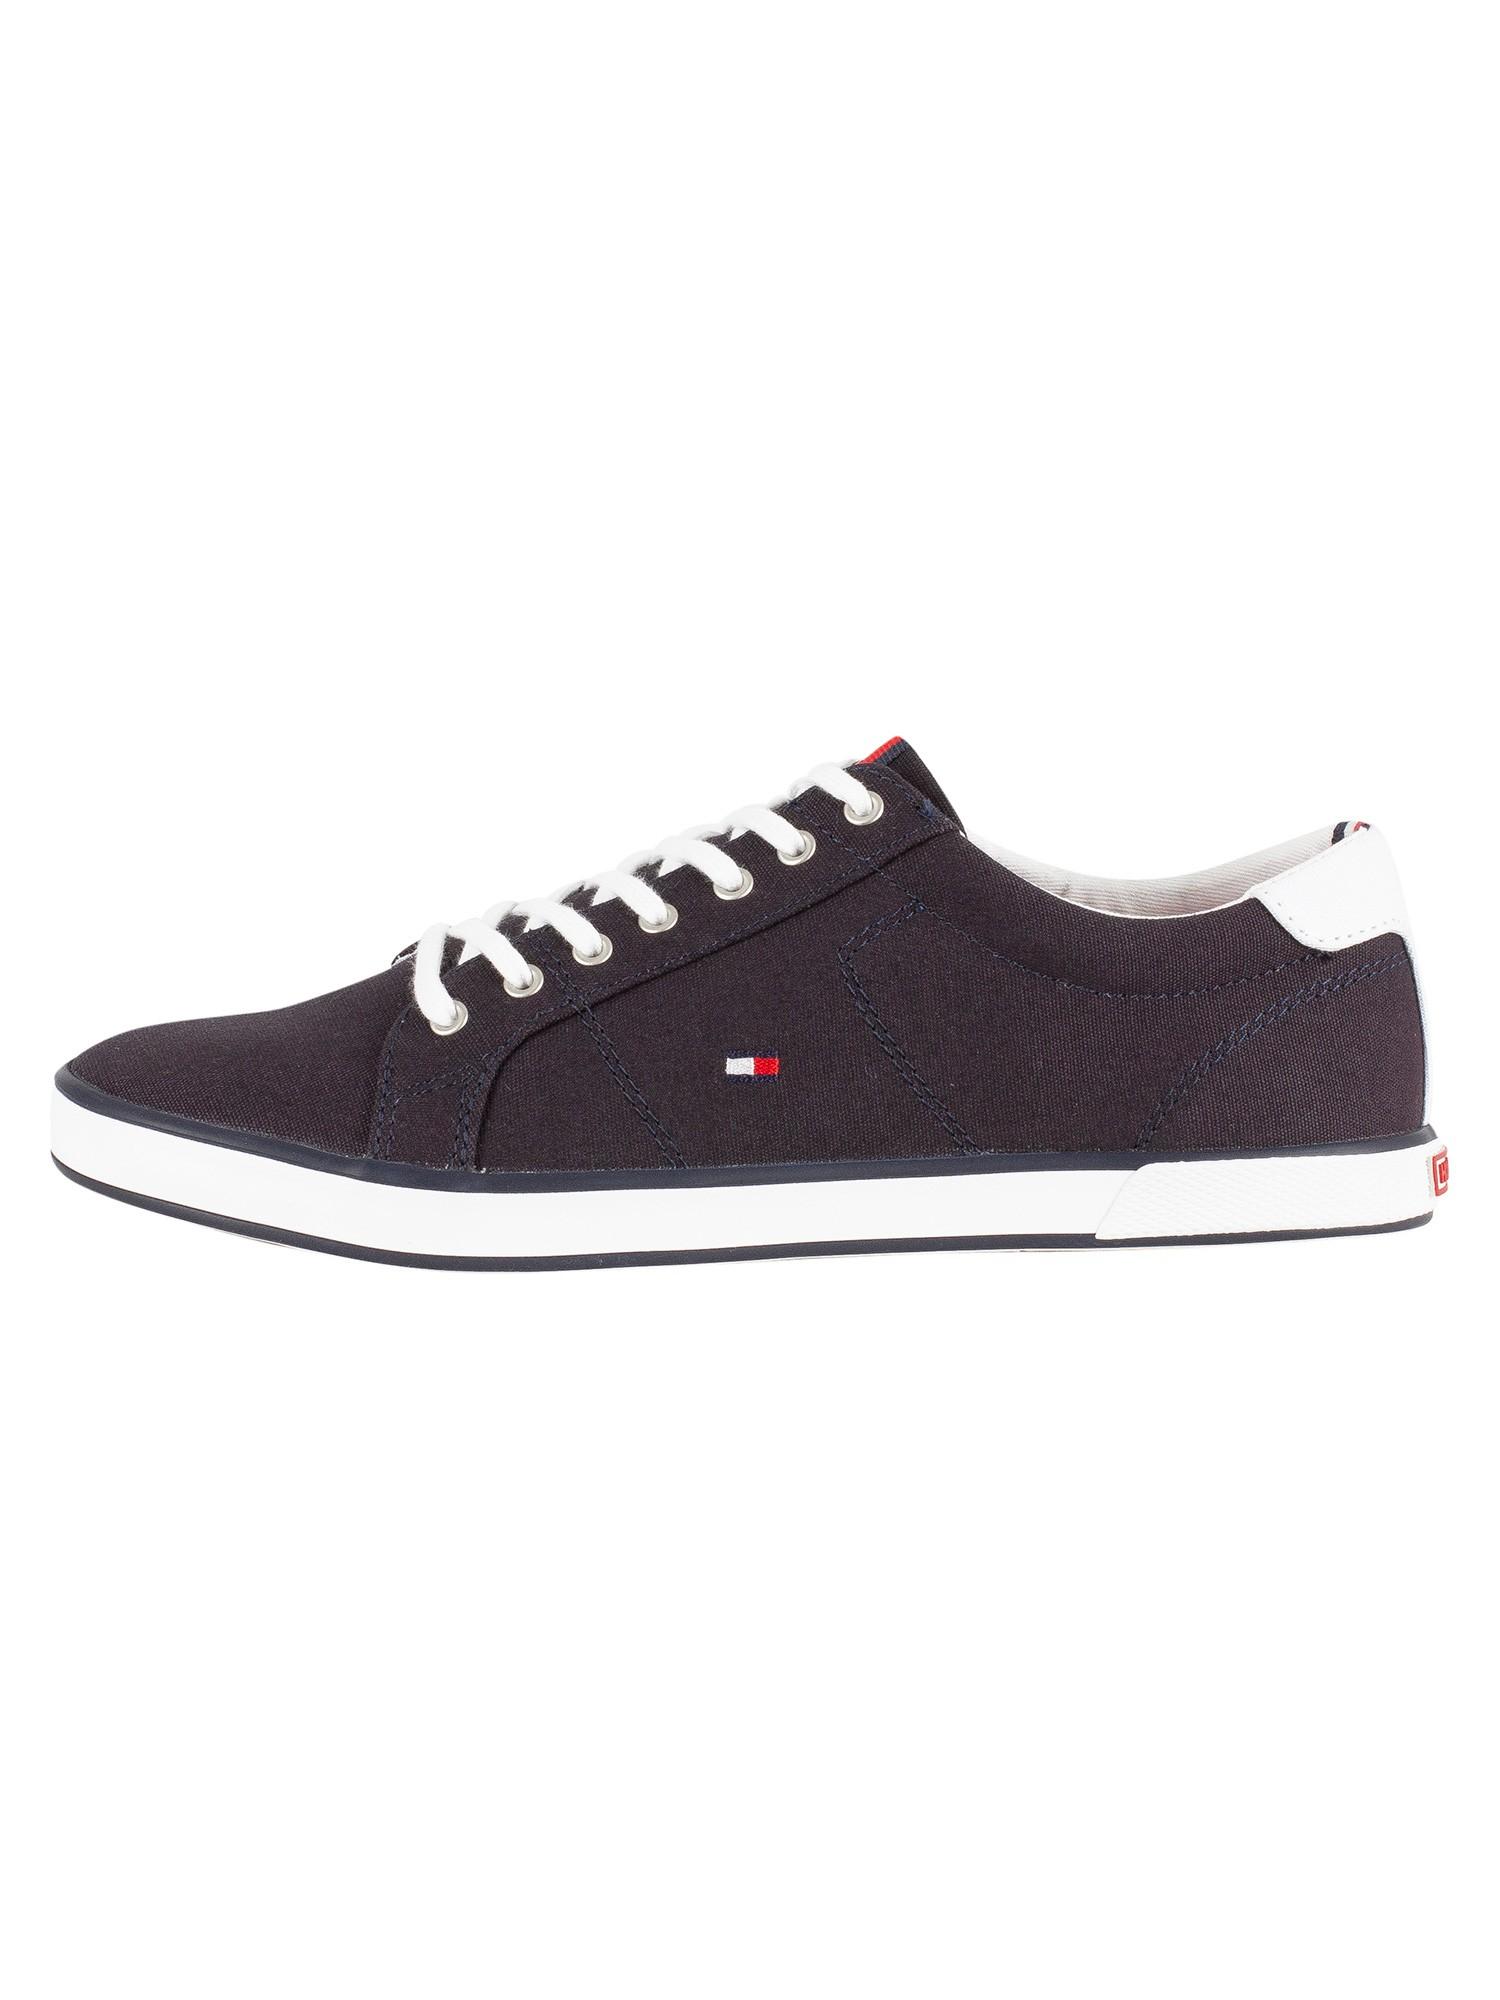 Tommy Hilfiger Canvas Hilfiger Harlow 1d Fm0fm00596100 S Lace-up Shoe in  Midnight (Blue) for Men - Lyst